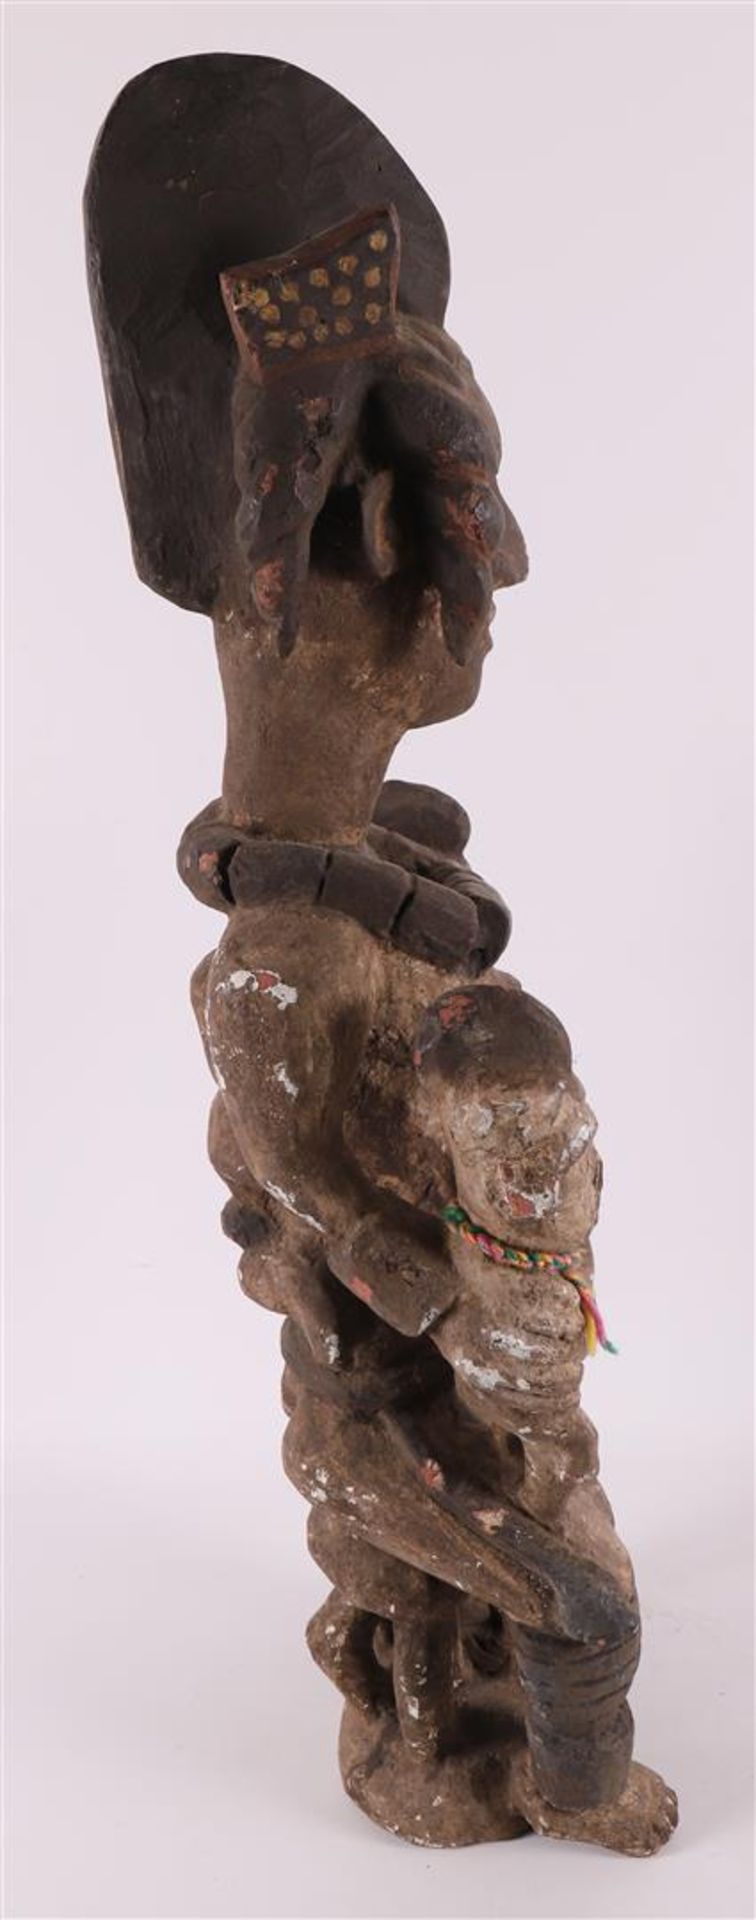 Ethnographic/tribal. A wooden fertility statue, Africa, Yoruba tribe - Image 4 of 4